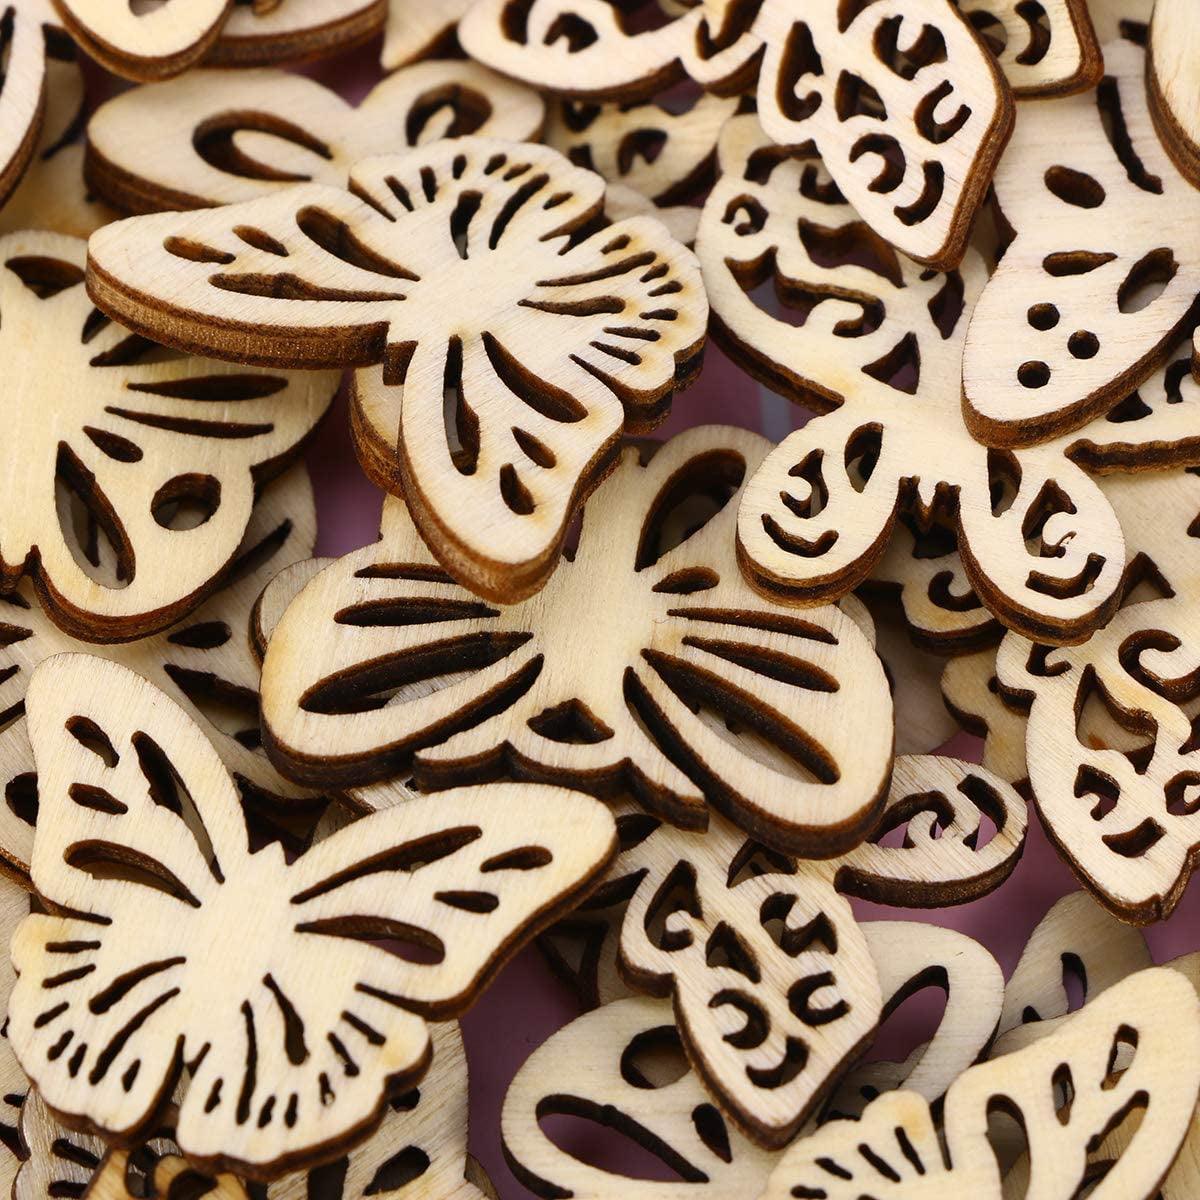 50Pcs Wood Discs Slices Butterfly Shape Unfinished Wooden Cutouts Craft DIY Decoration - WoodArtSupply